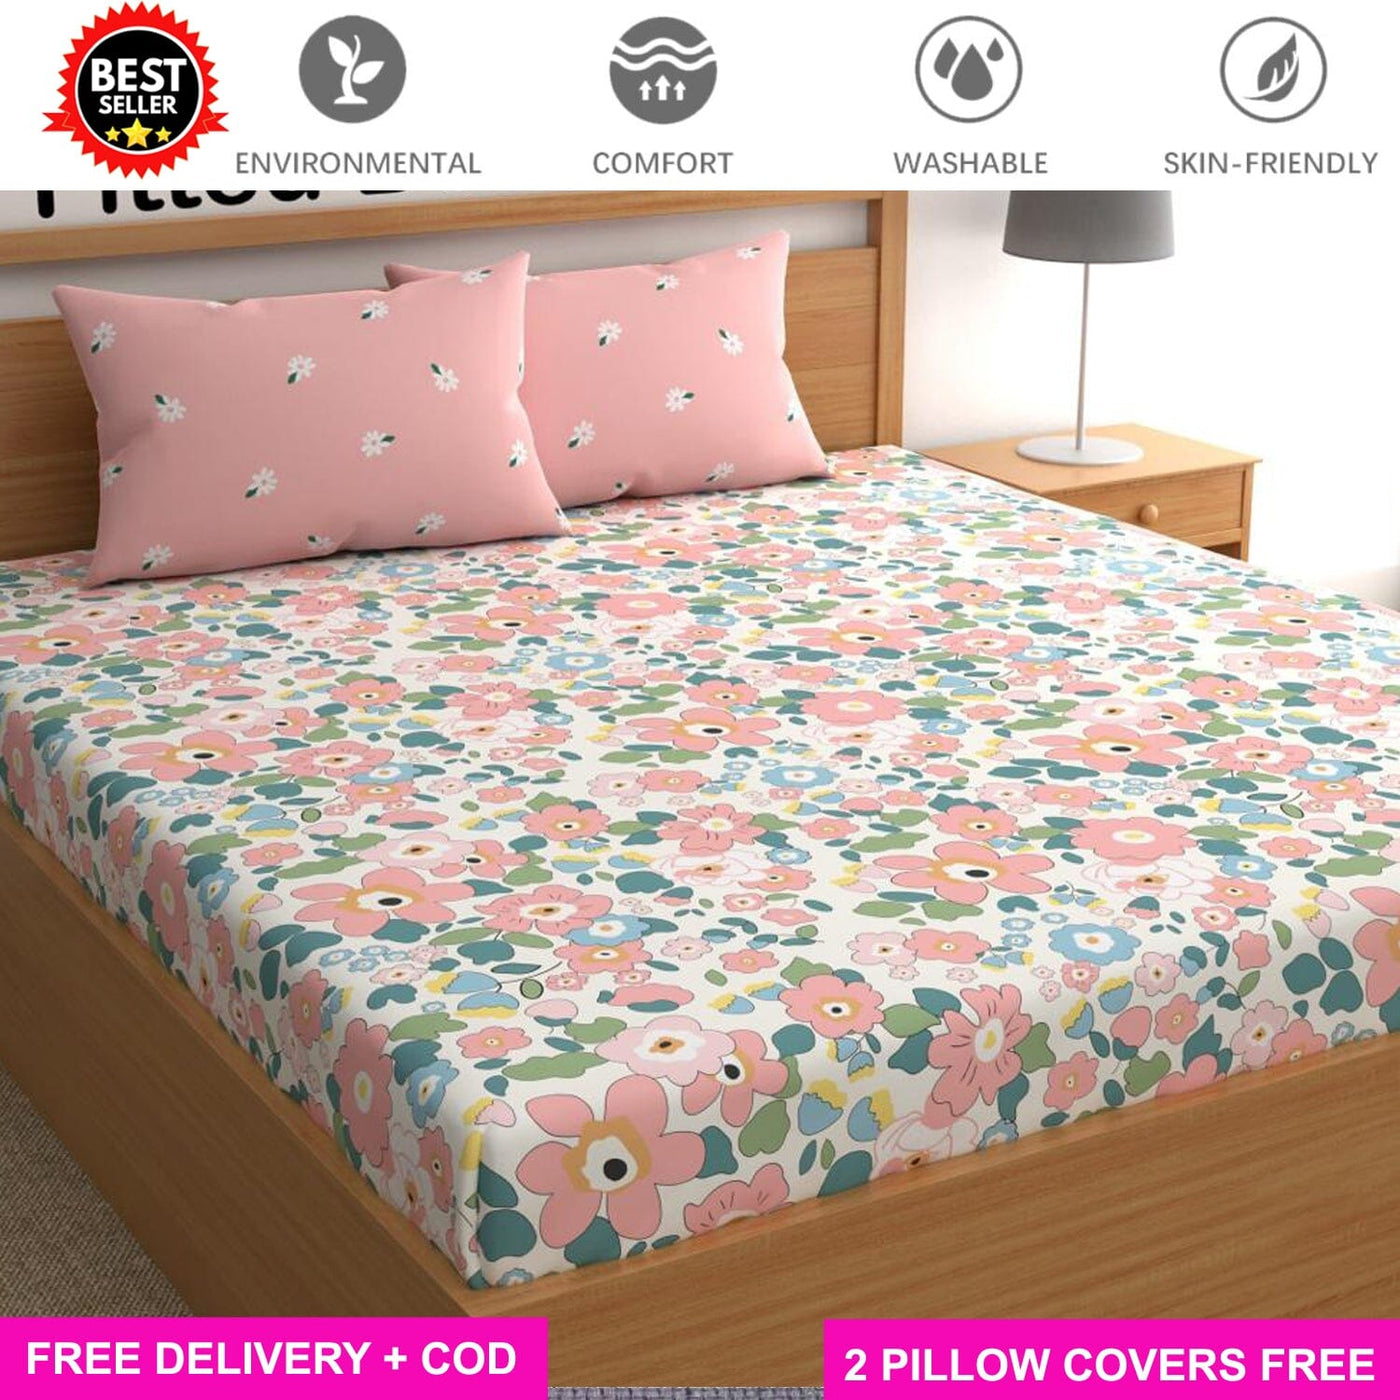 Pink Beauty Contrast Full Elastic Fitted Bedsheet with 2 Pillow Covers - King Size Bed Sheets Great Happy IN 